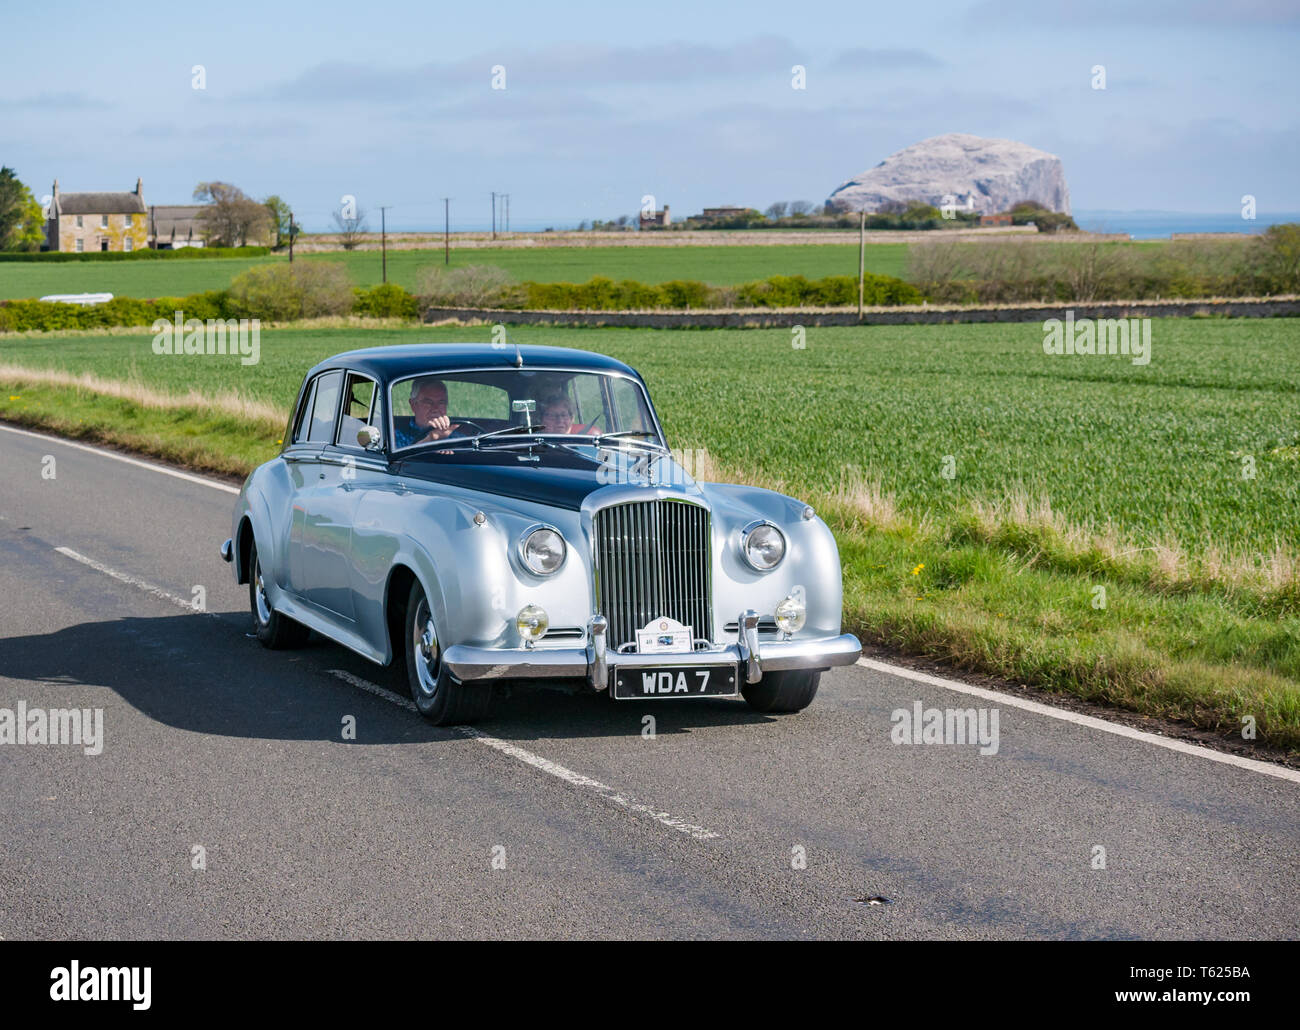 East Lothian, UK. 28 April 2019. Classic Car Tour: North Berwick Rotary Club holds its 3rd rally with 65 classic cars entered. The car rally route is from East Lothian and through the Scottish Borders, raising money for local charities. A two-toned 1958 Bentley S1 Sports Saloon Stock Photo